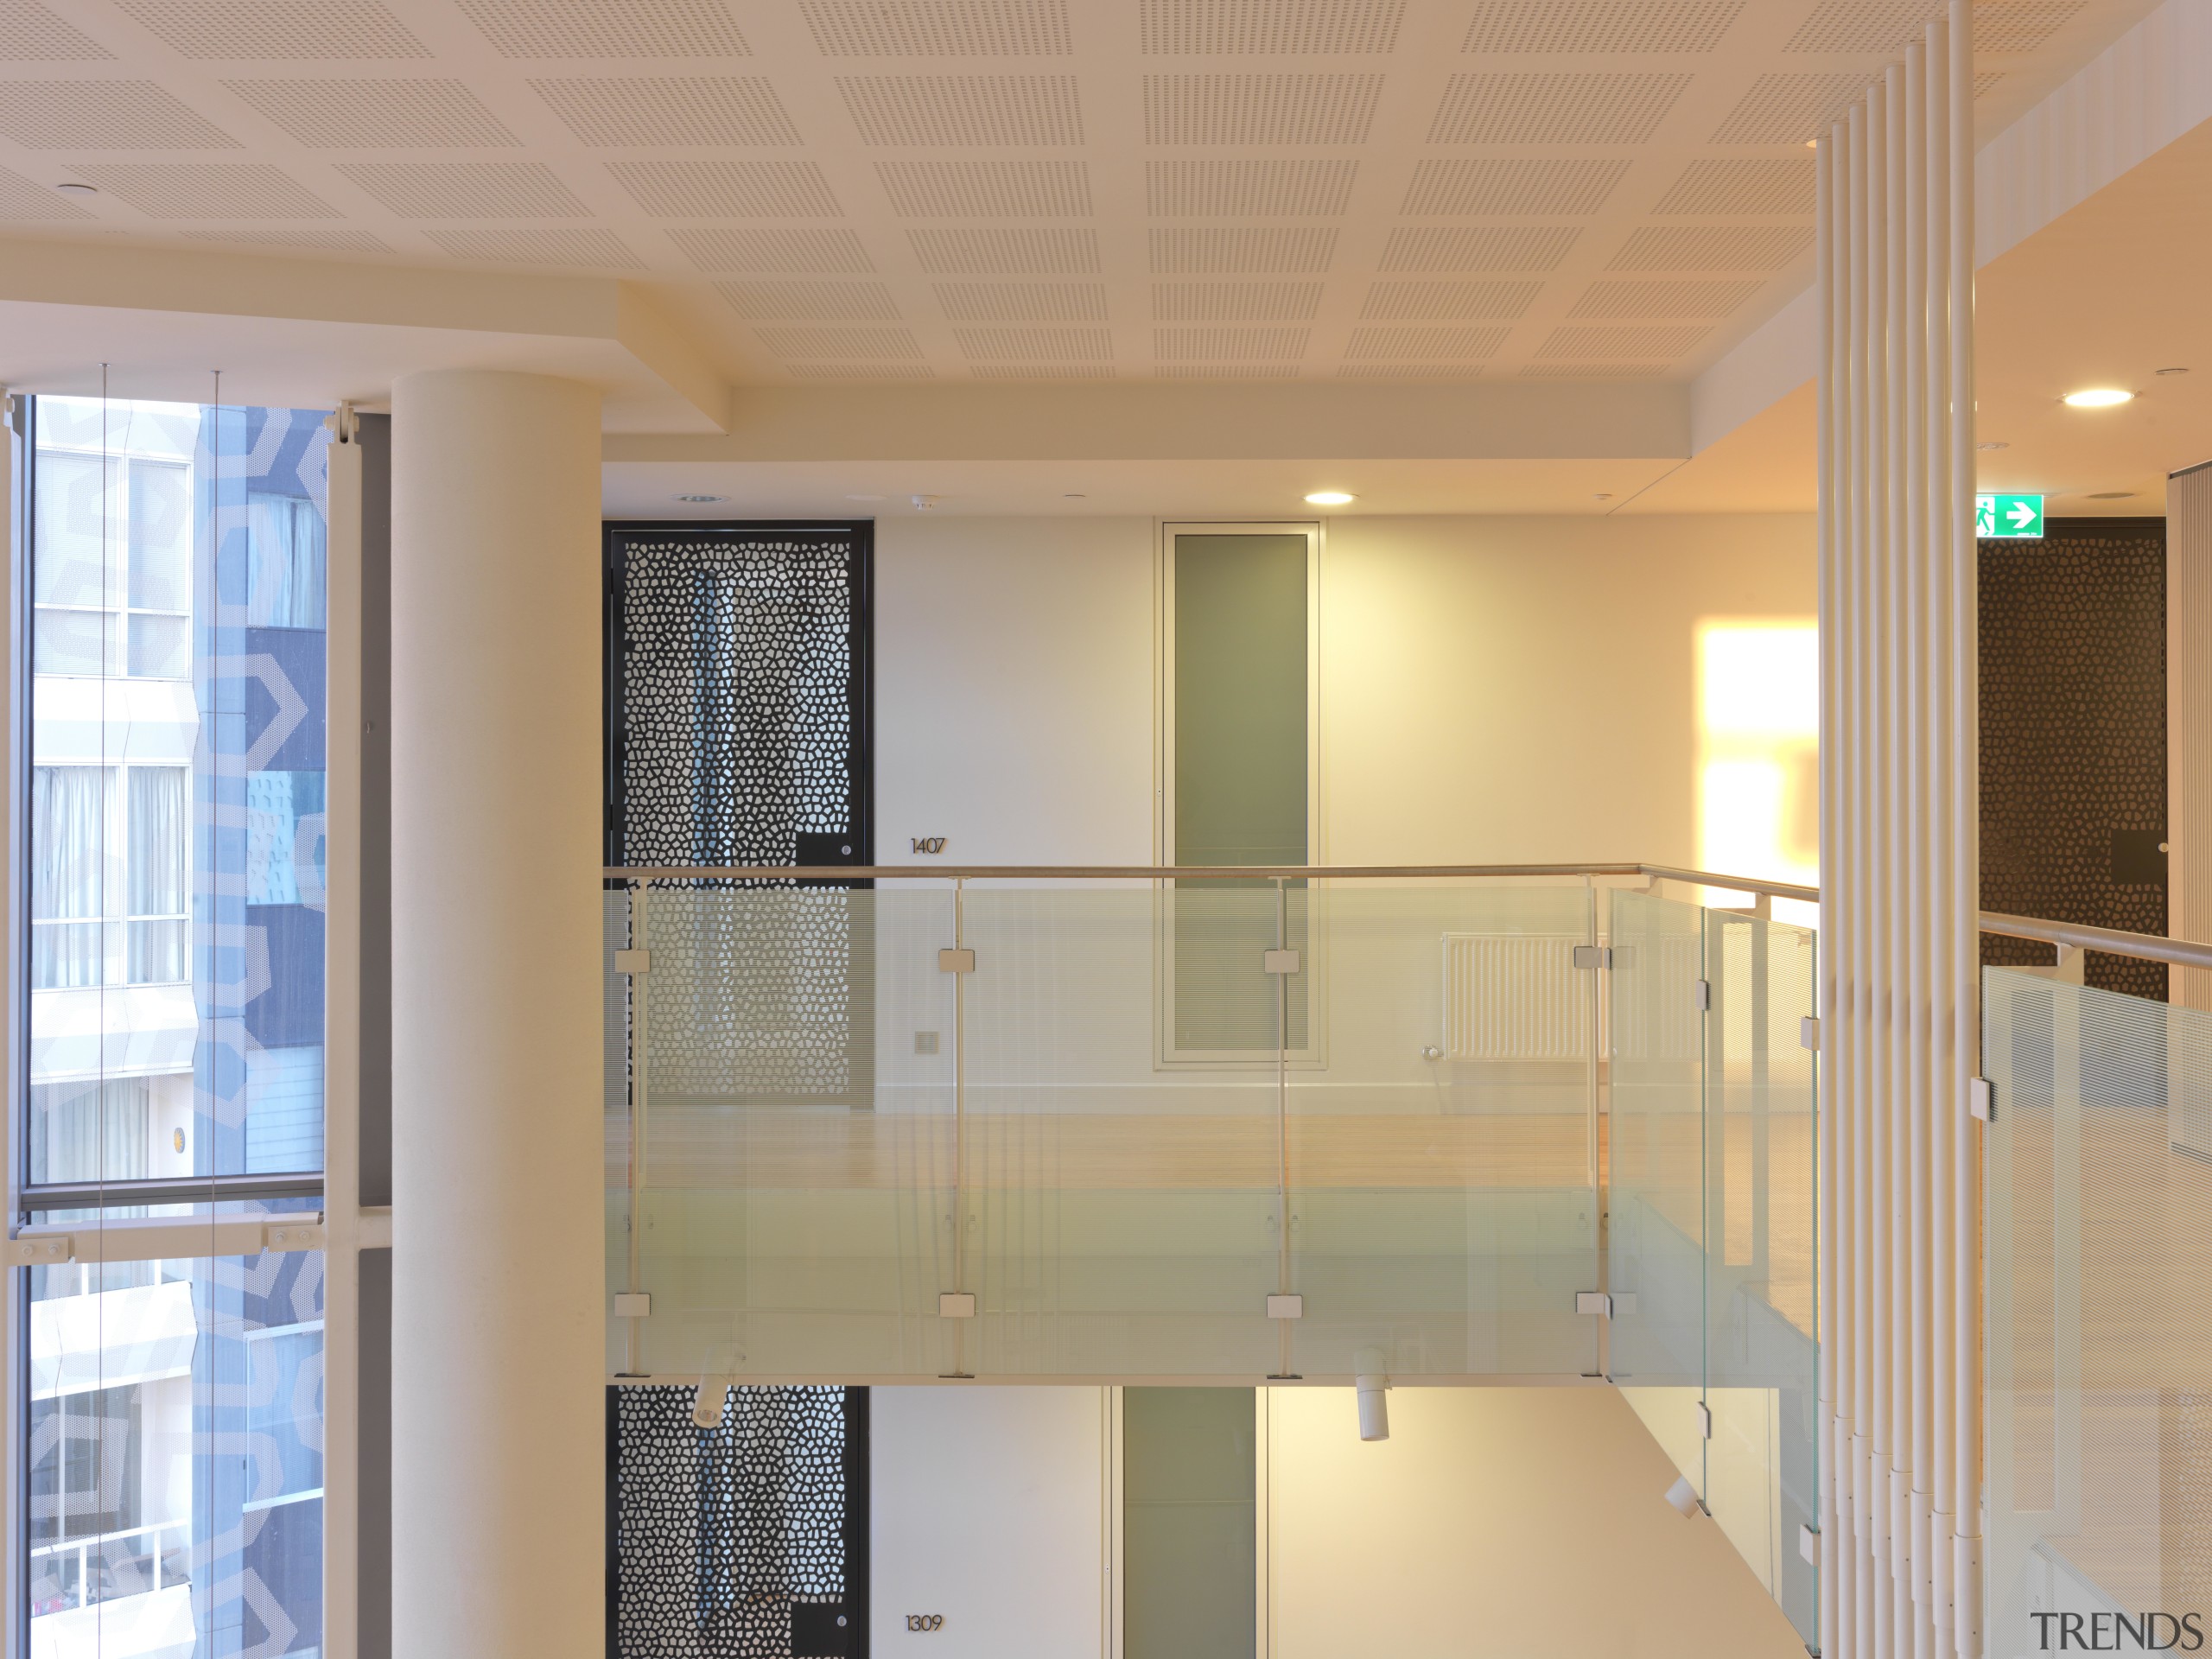 View of interior balcony at the Tripych residential apartment, architecture, ceiling, daylighting, floor, flooring, glass, home, interior design, lobby, real estate, window, orange, gray